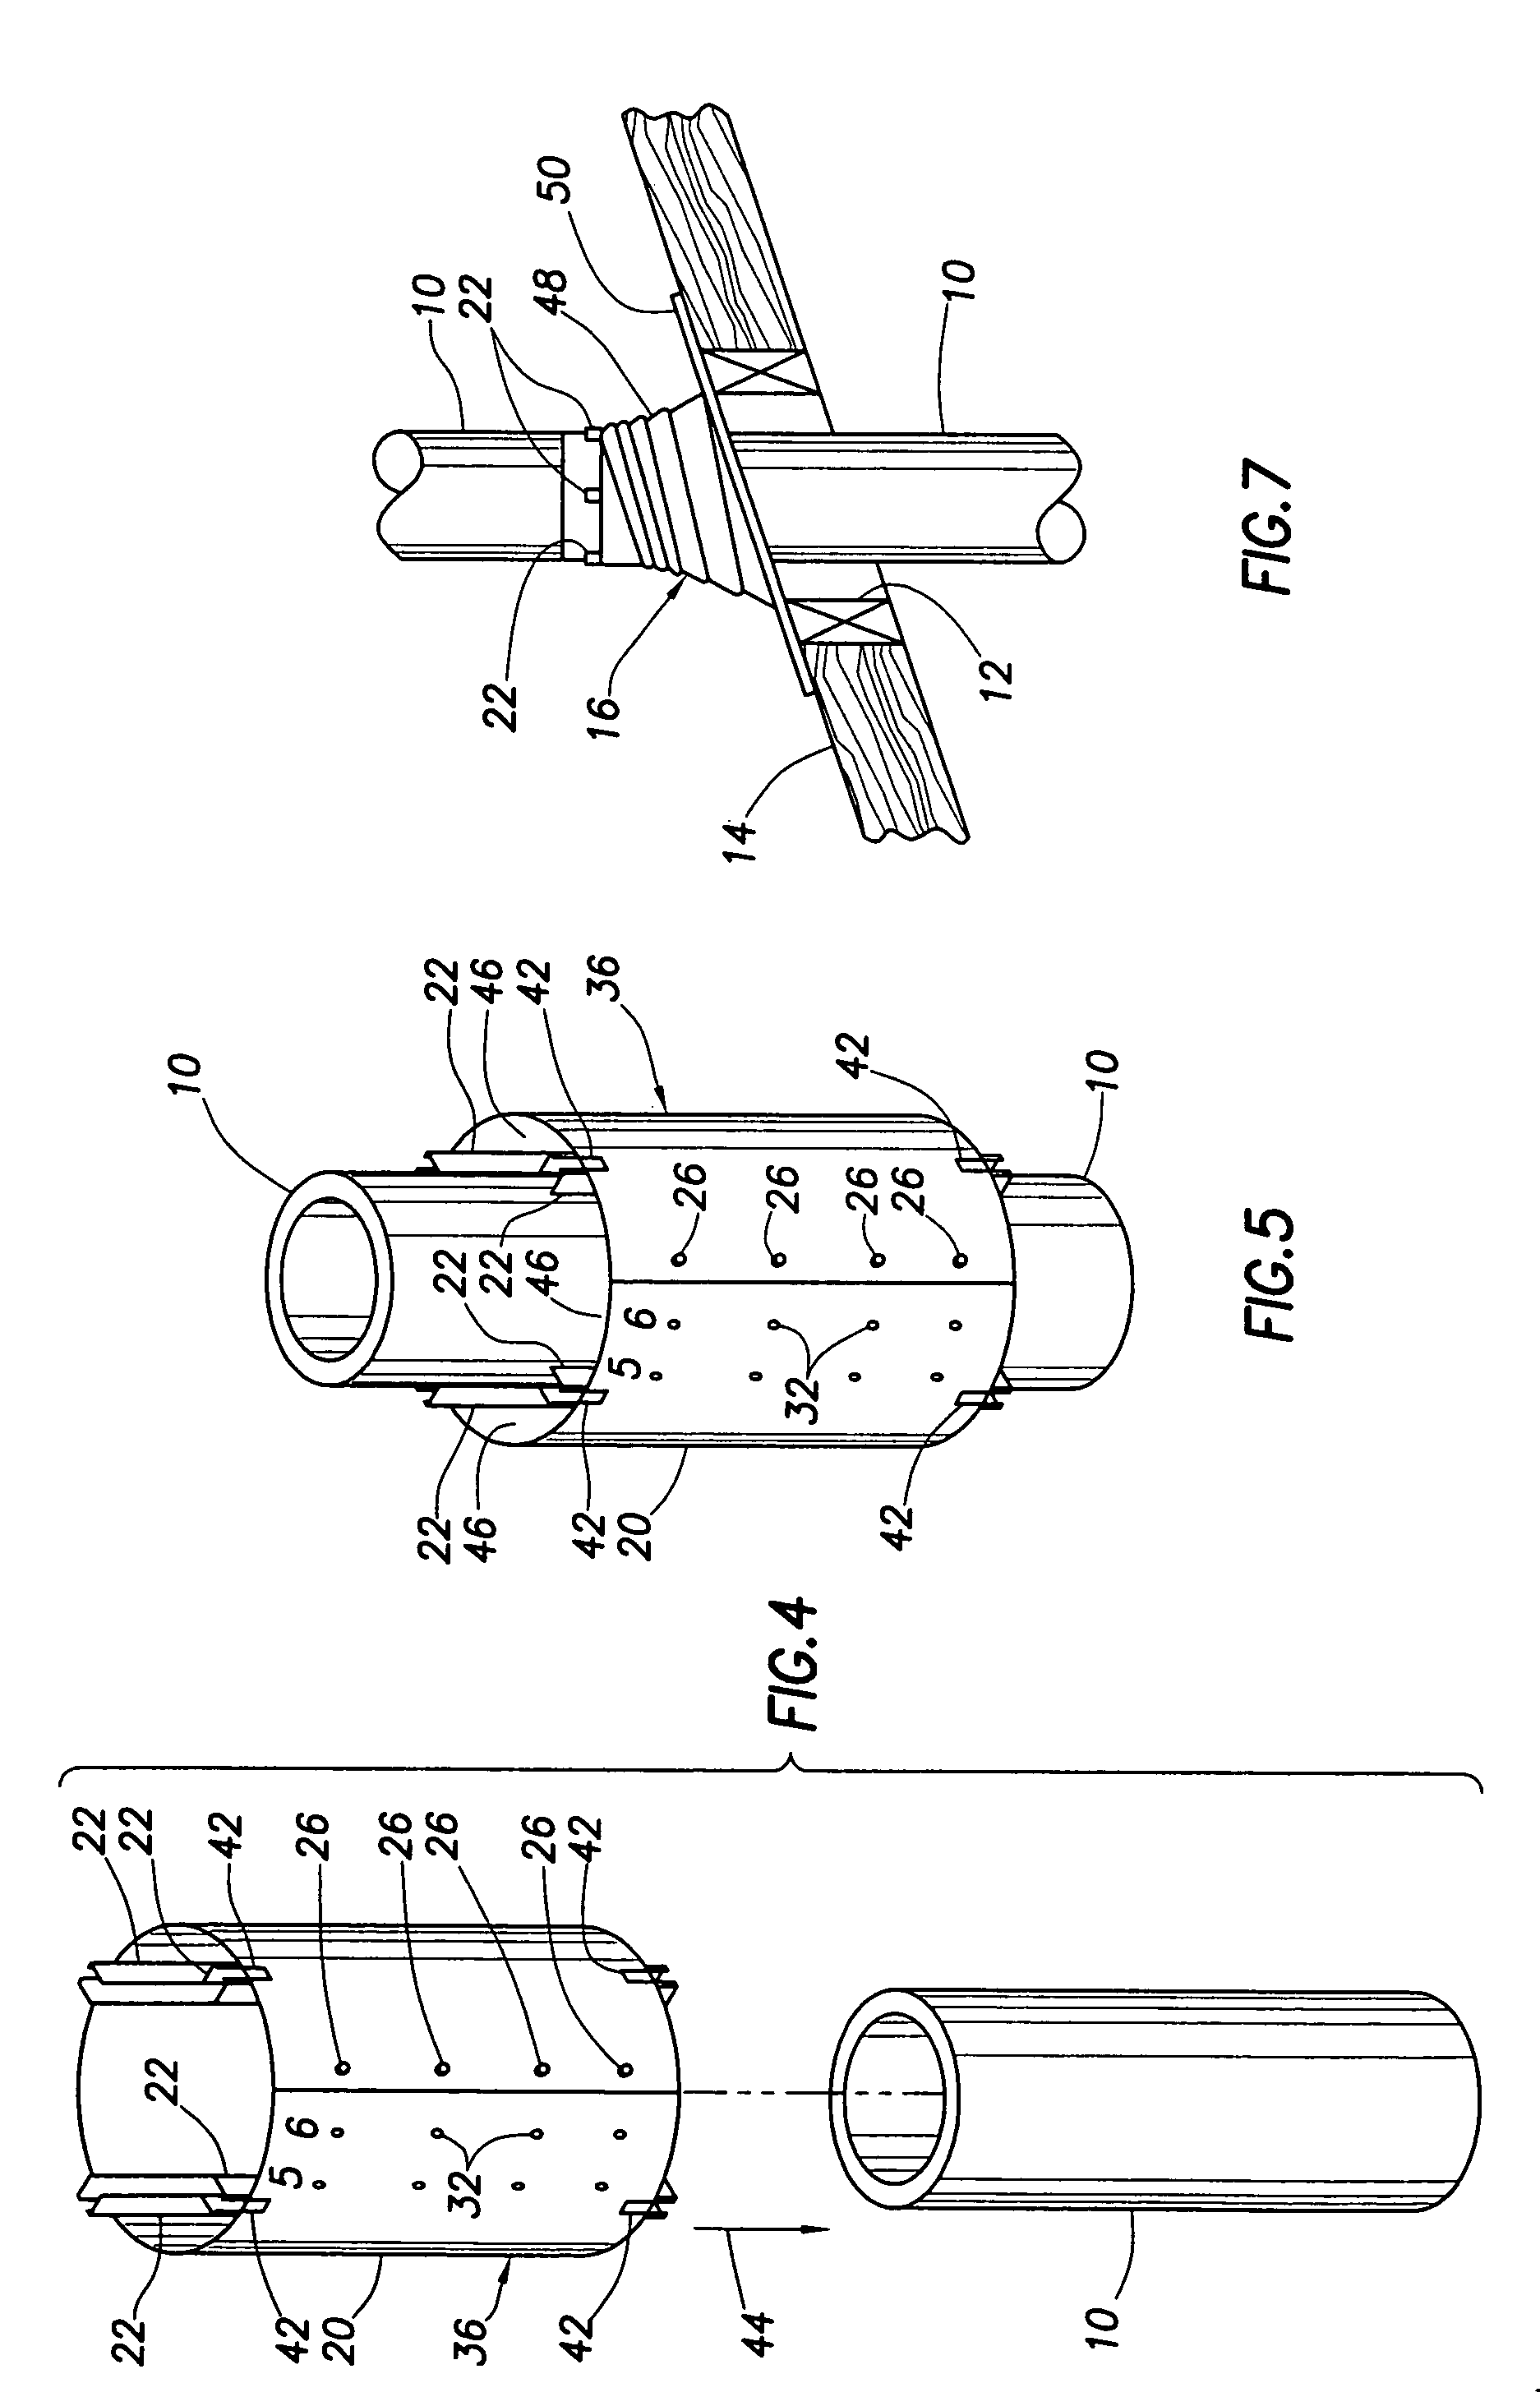 Rubber boot-based roof flashing apparatus